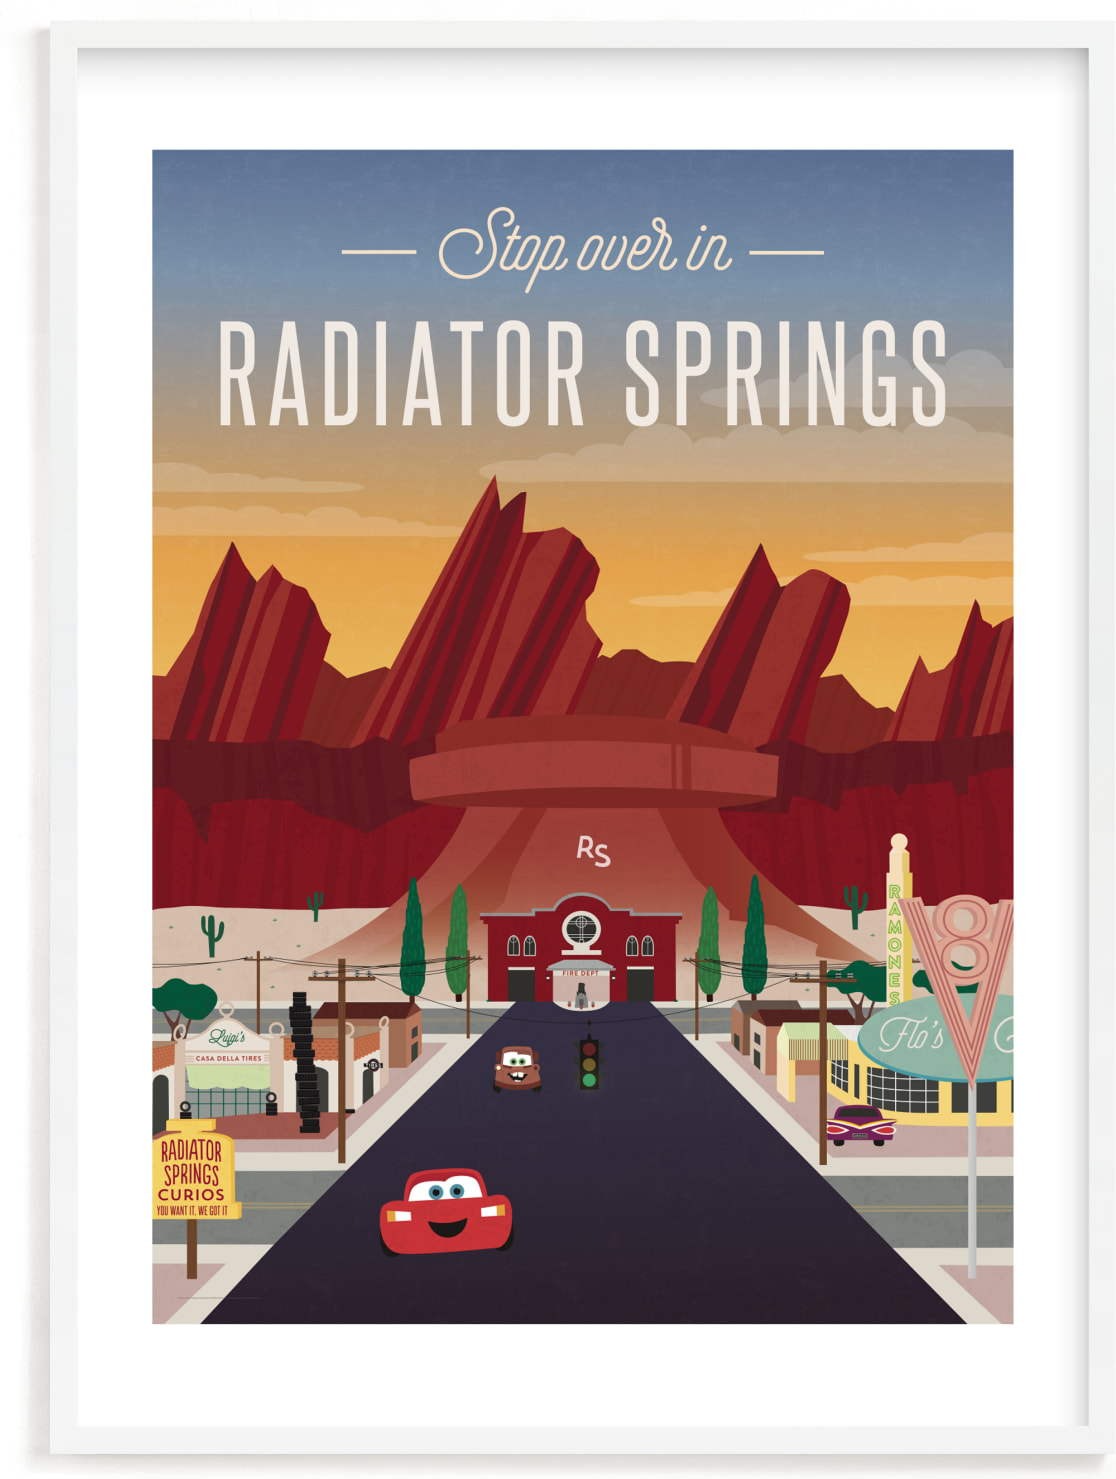 This is a colorful, beige, red disney art by Erica Krystek called Stop Over In Radiator Springs from Disney and Pixar's Cars.